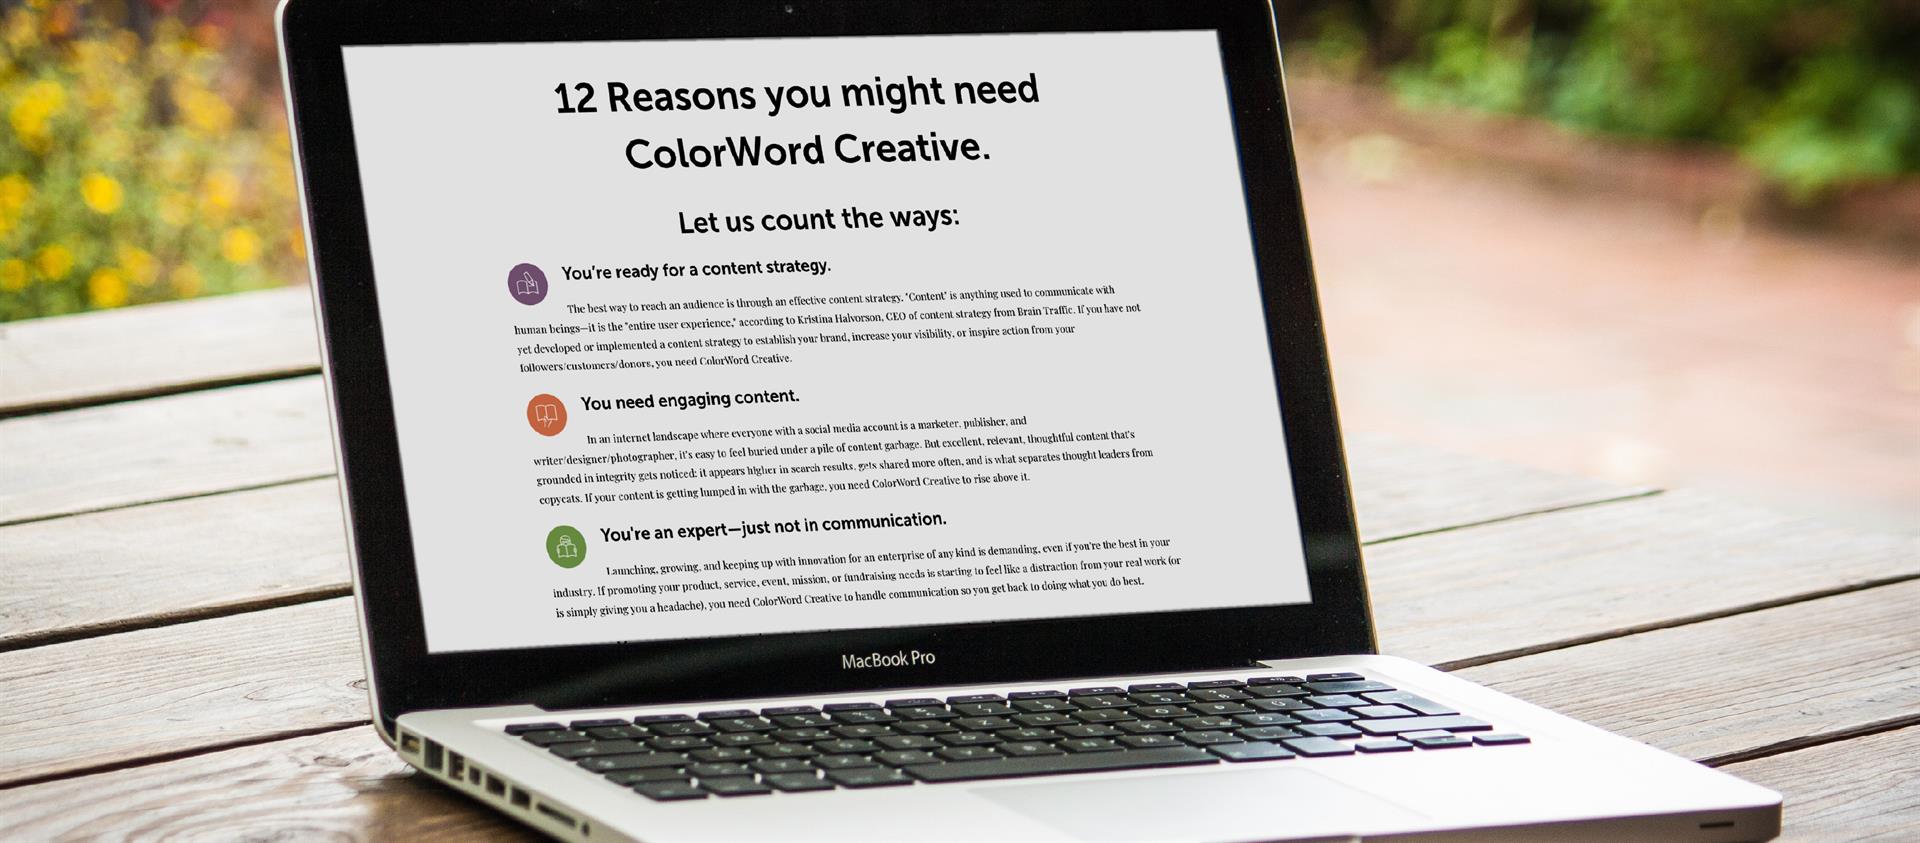 Visit our blog to read about 12 reasons you might need ColorWord Creative.